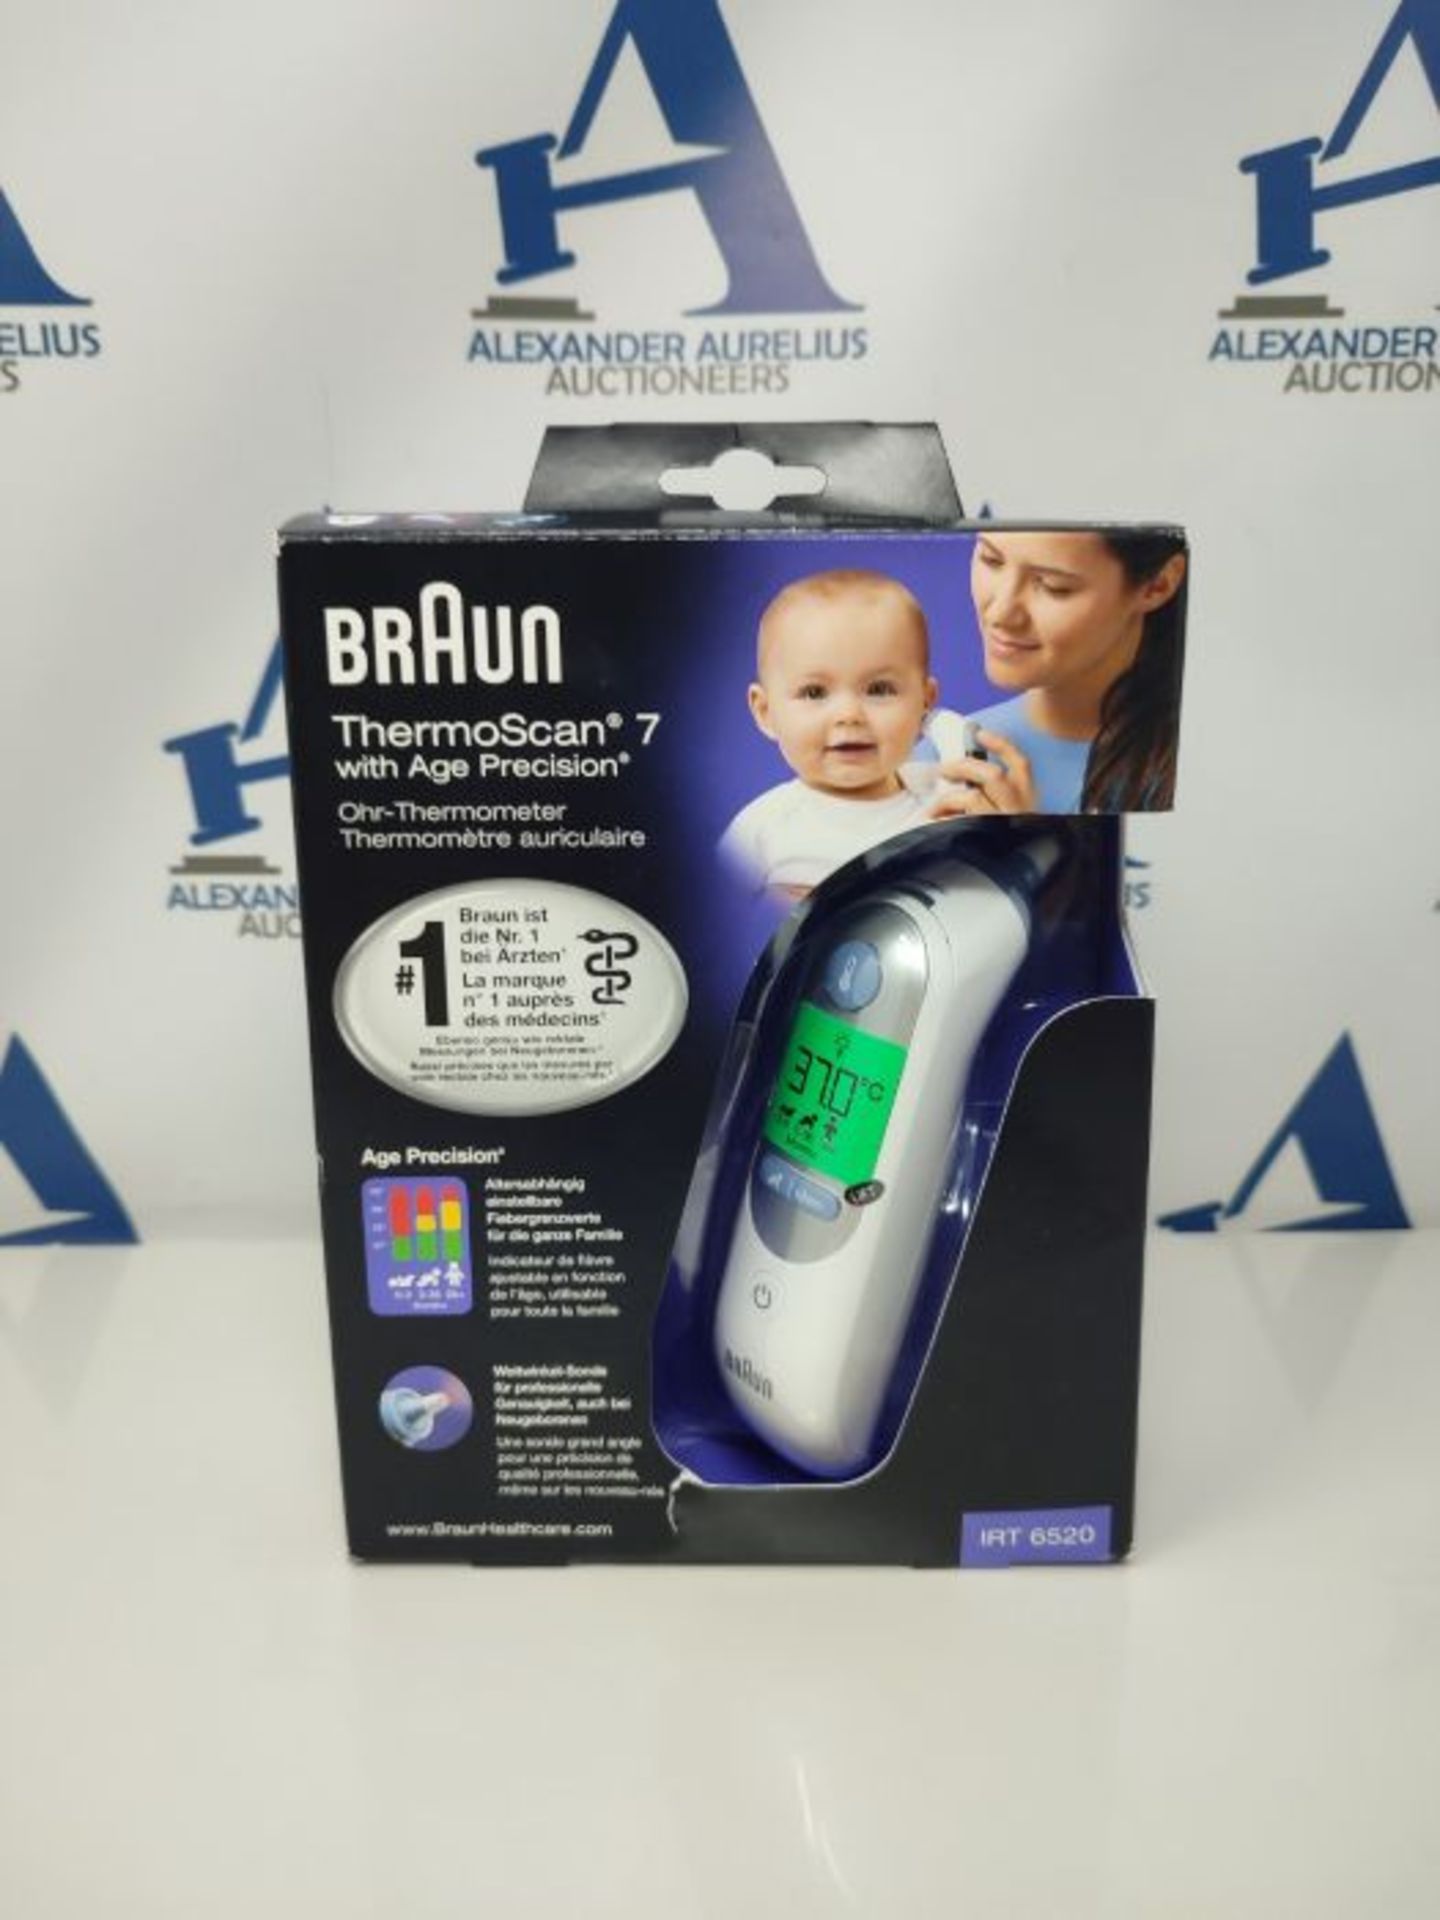 Braun Healthcare ThermoScan 7 Ear thermometer with Age Precision (accurate, convenient